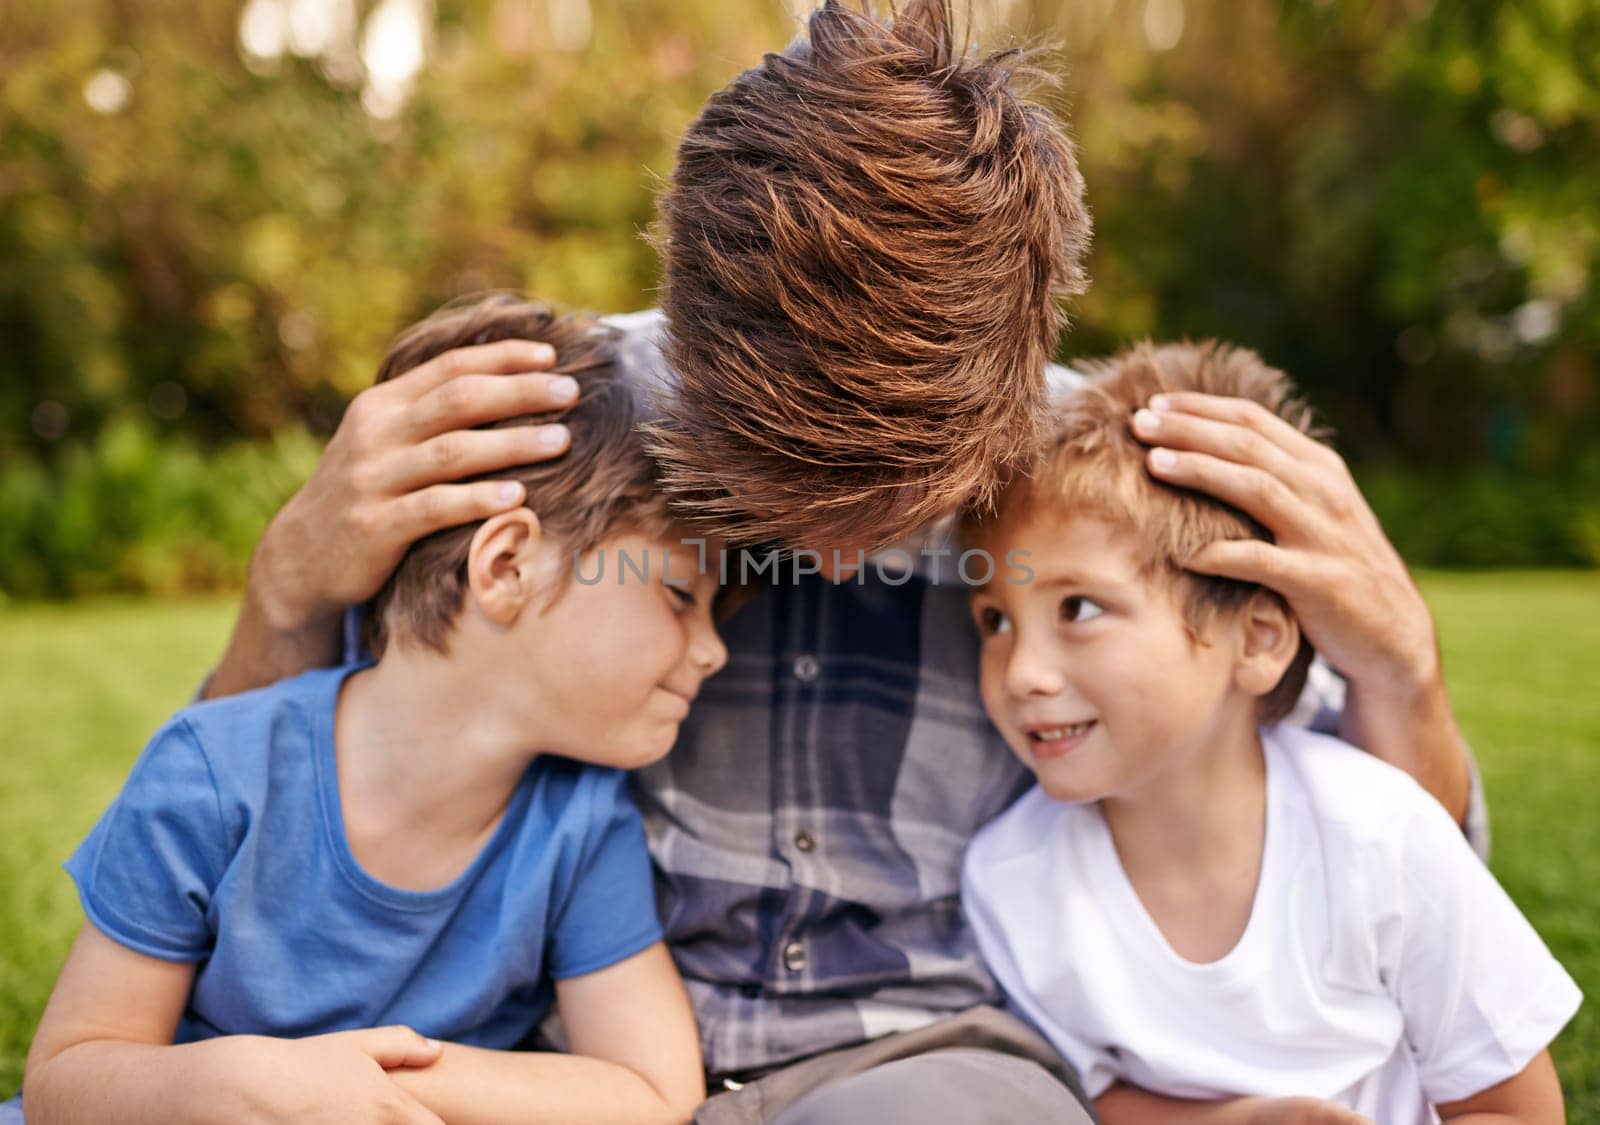 Smile, nature and young children with father relaxing on grass in outdoor park or garden. Happy, love and excited boy kids sitting on lawn with dad for love, care and bonding in field together